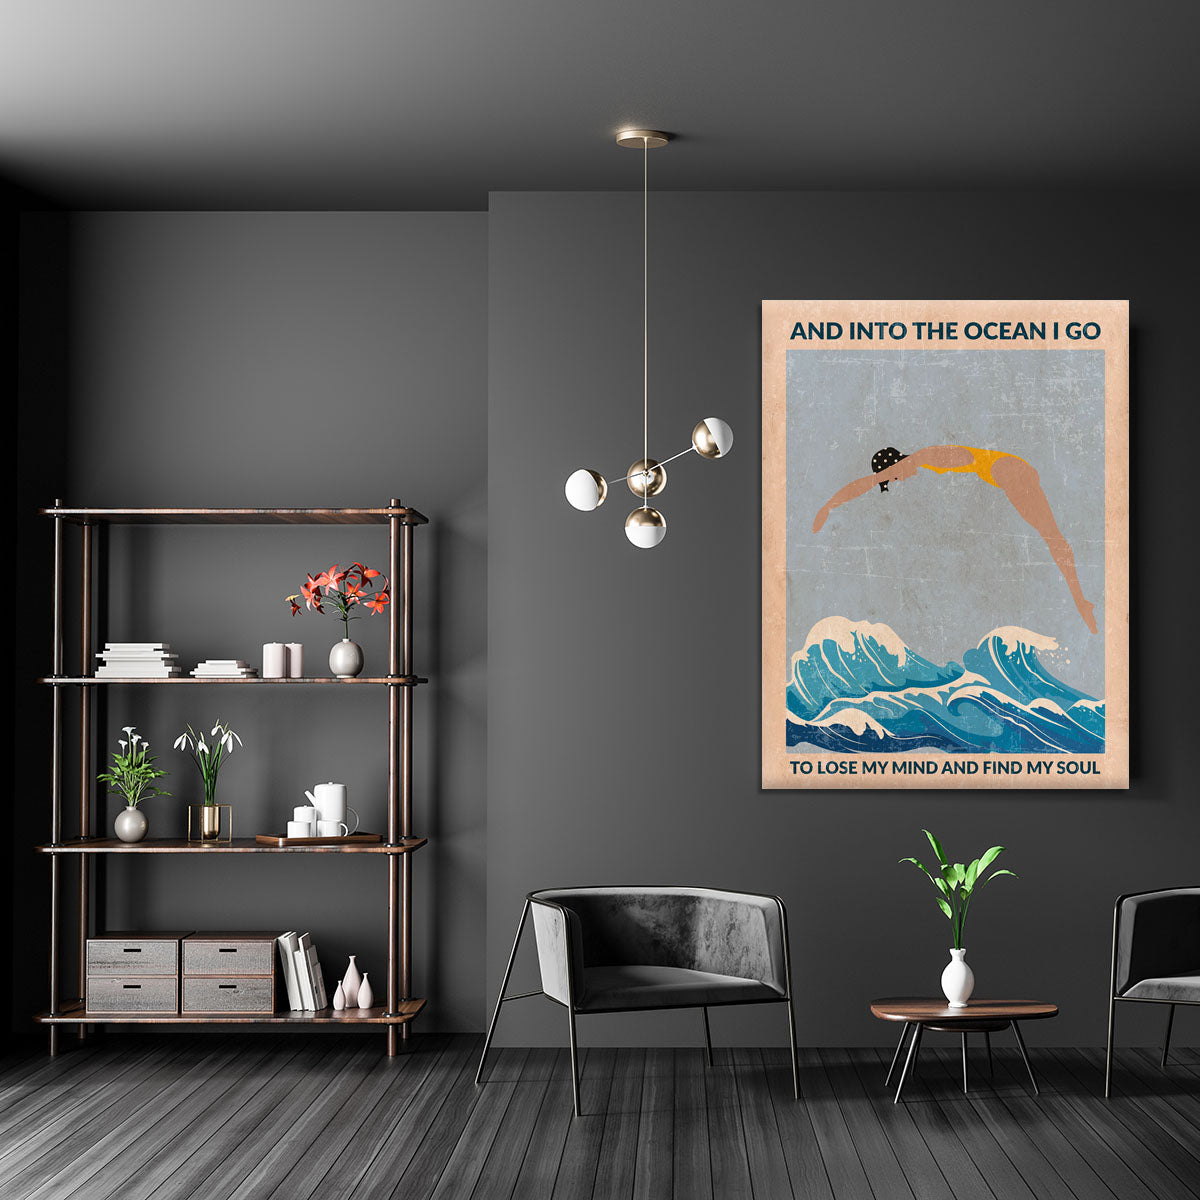 Into the Ocean blue Standard Wall Art Canvas Print or Poster - 1x - 5